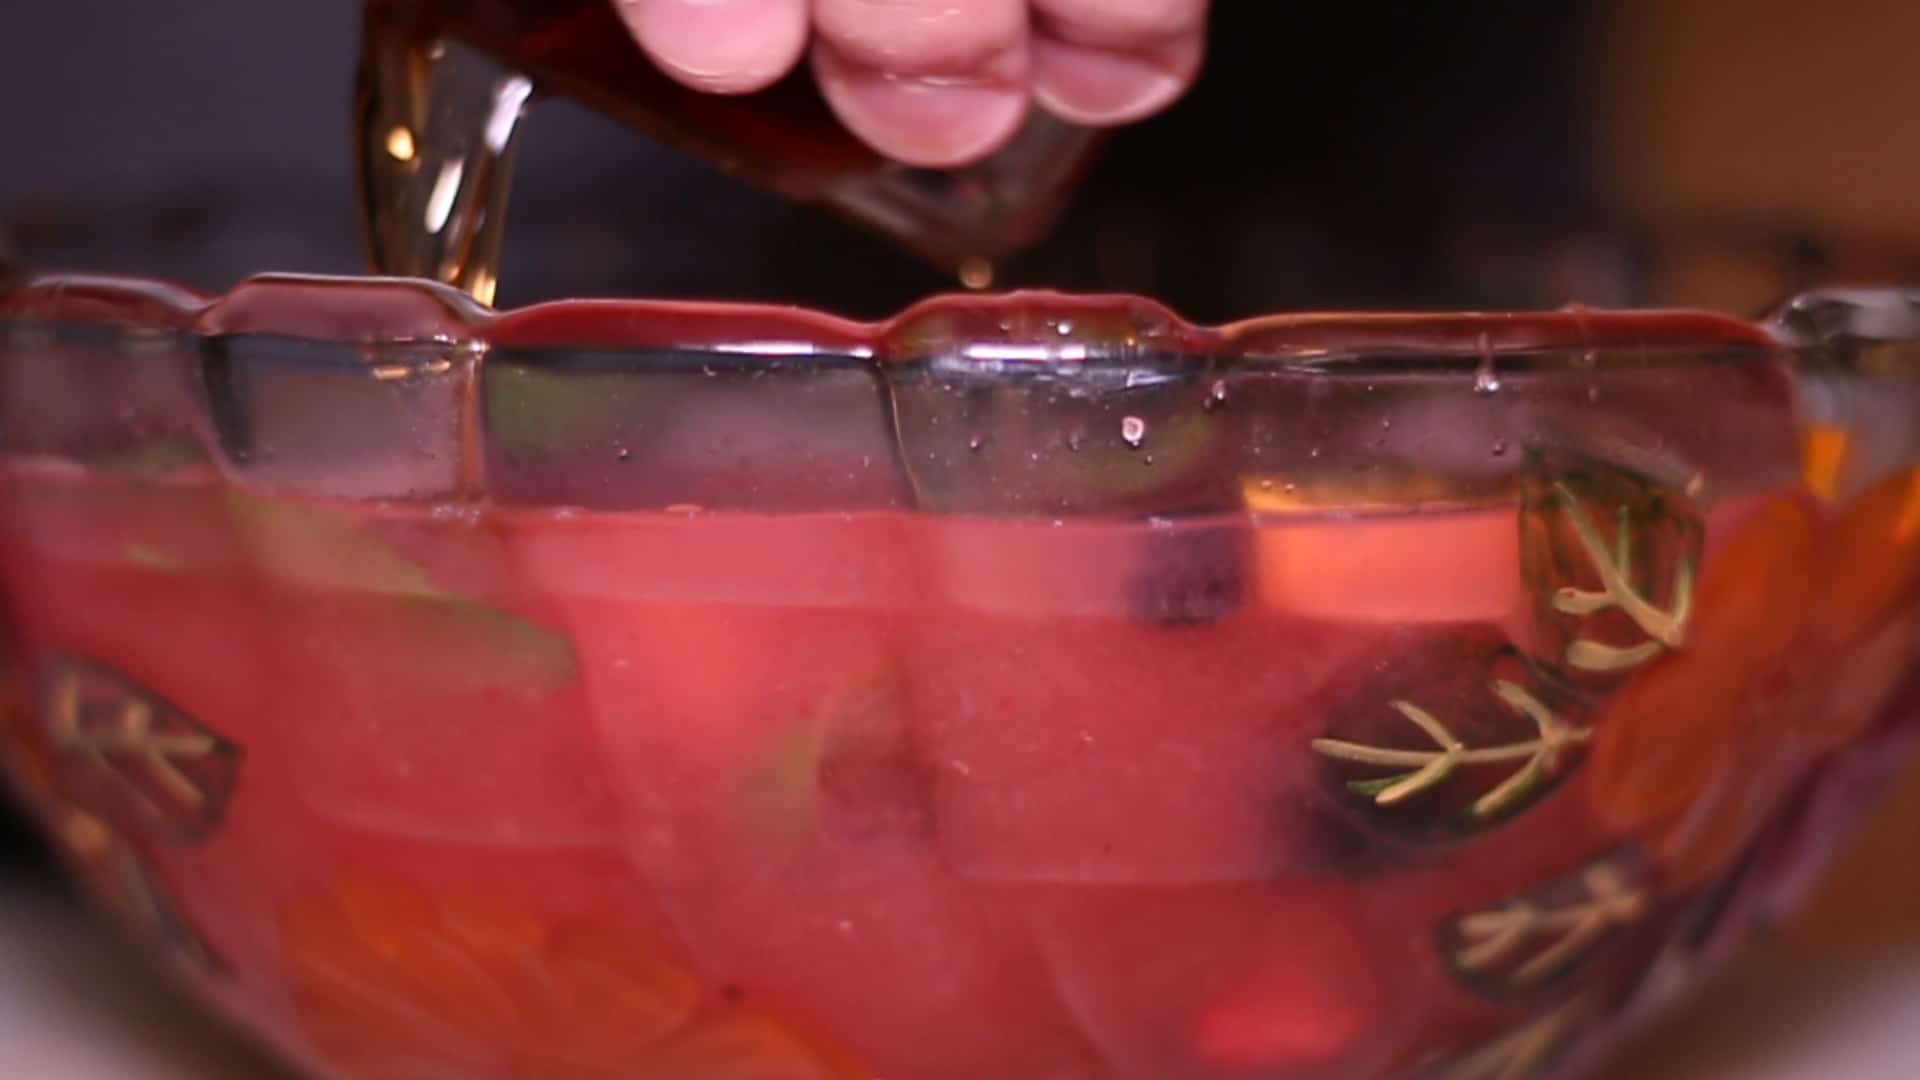 New years fruity punch